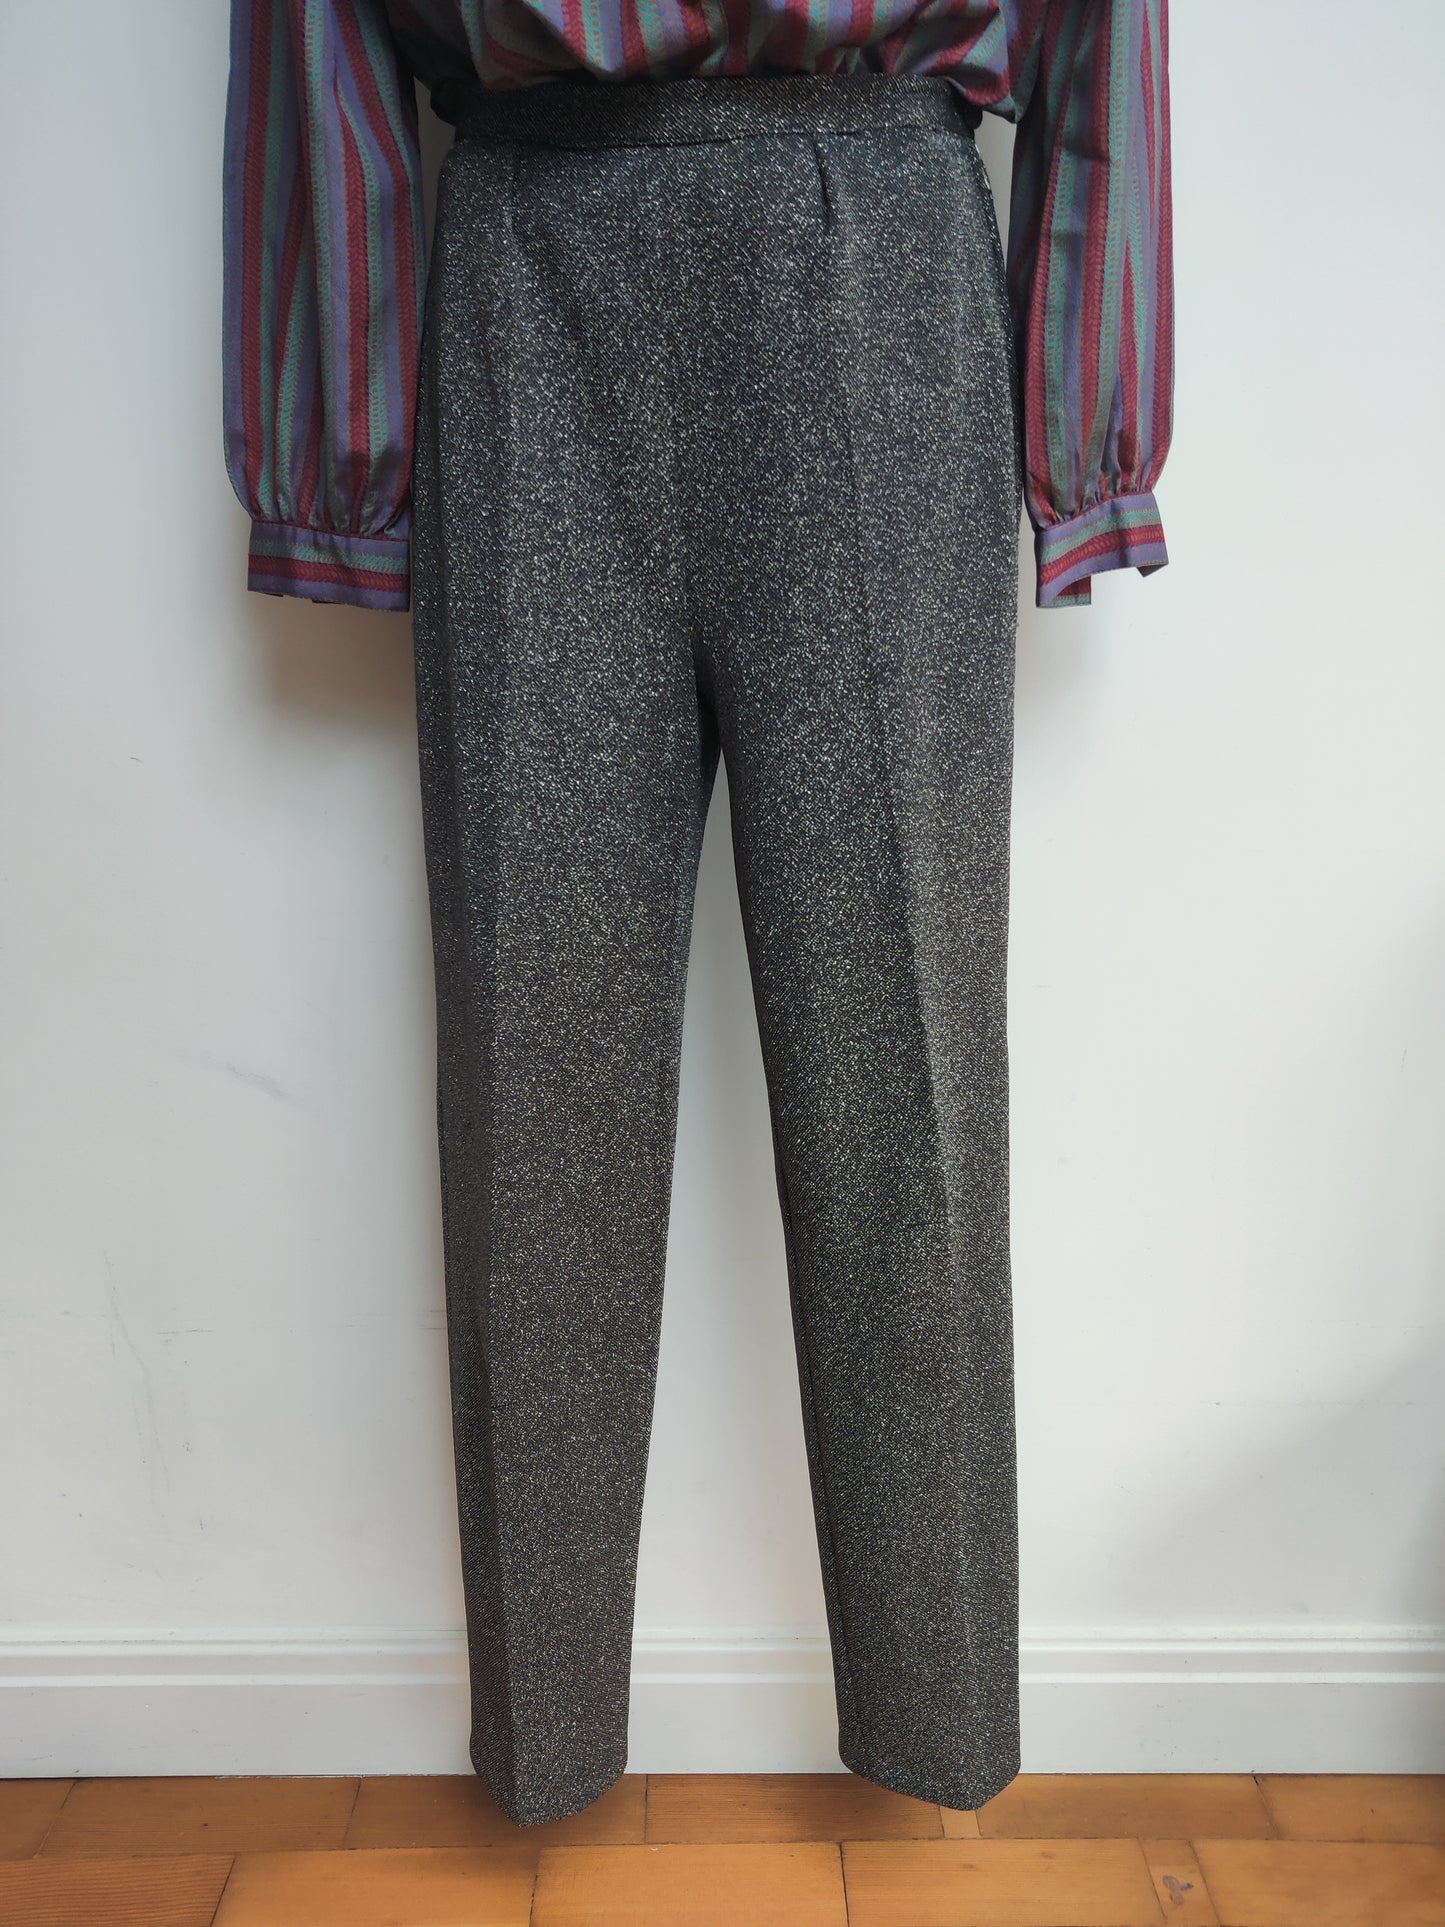 Vintage glitter trousers. Size 8.